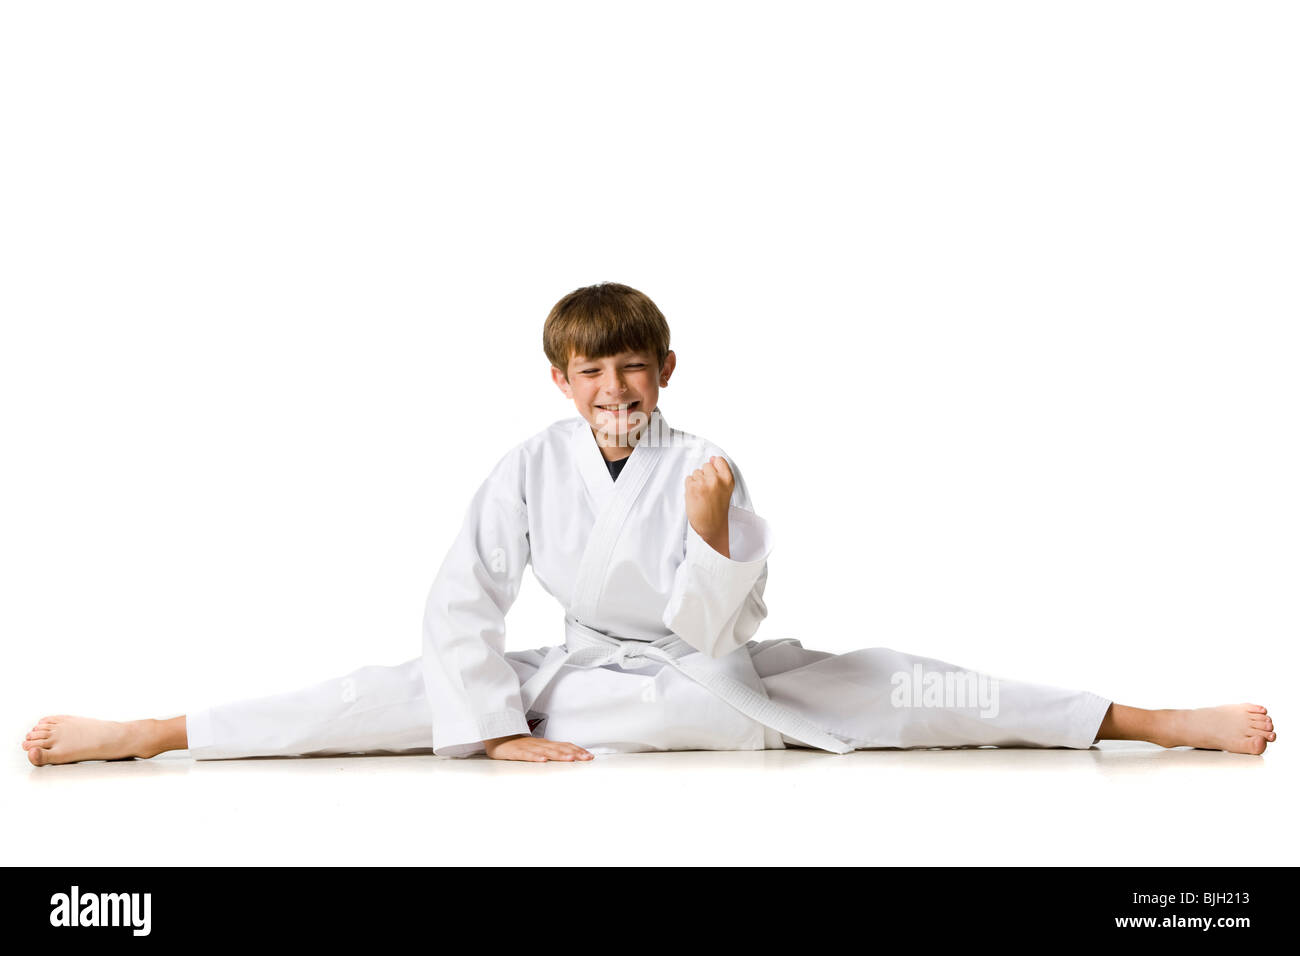 youth practicing martial arts Stock Photo